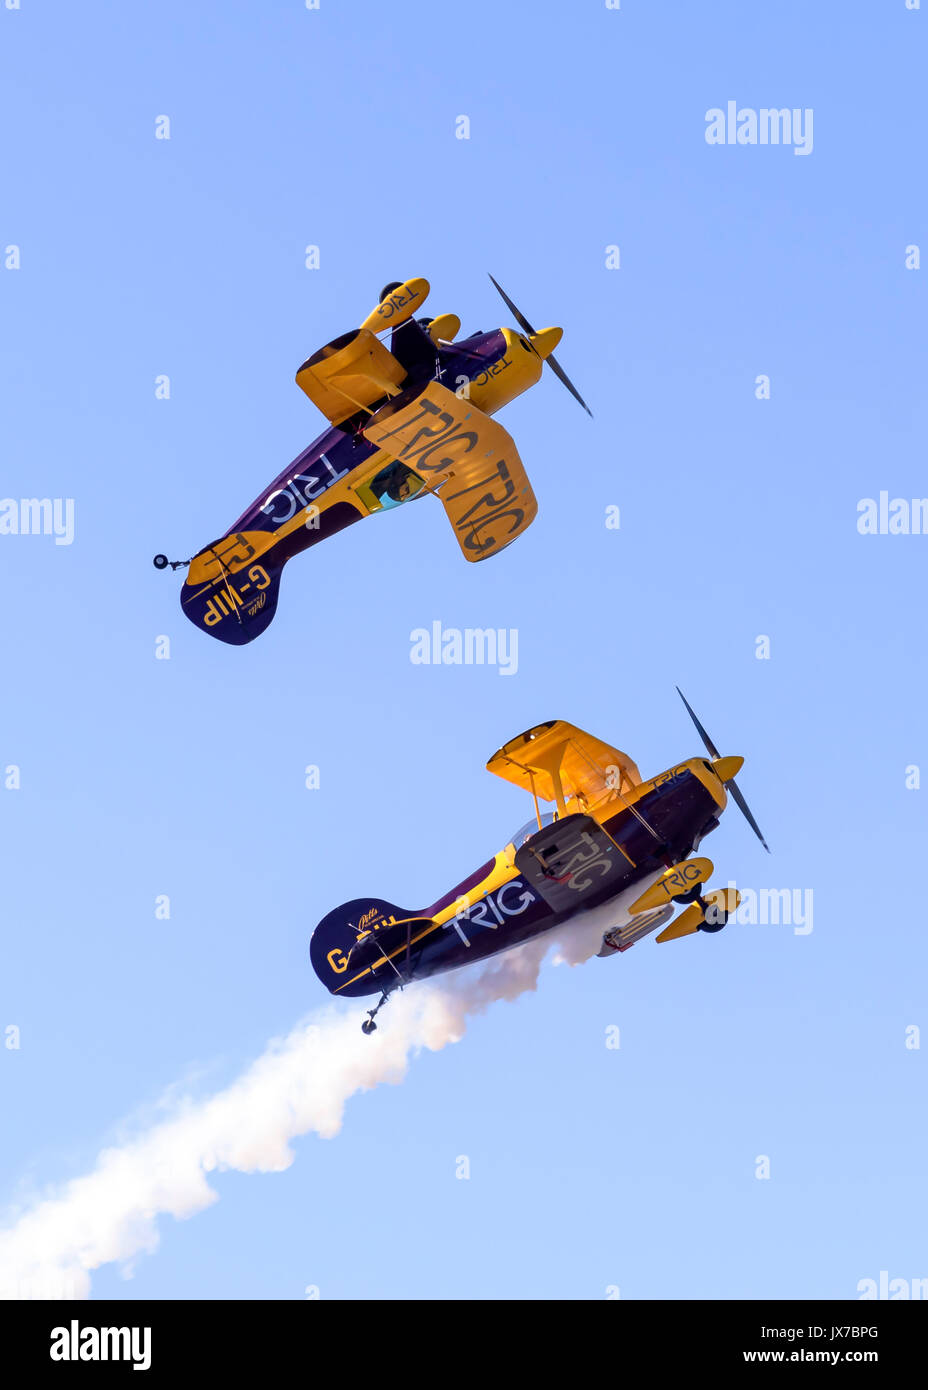 Trig Aerobatic Team performing close-formation aerobatic stunts in their Pitts Special S-1D biplanes Stock Photo